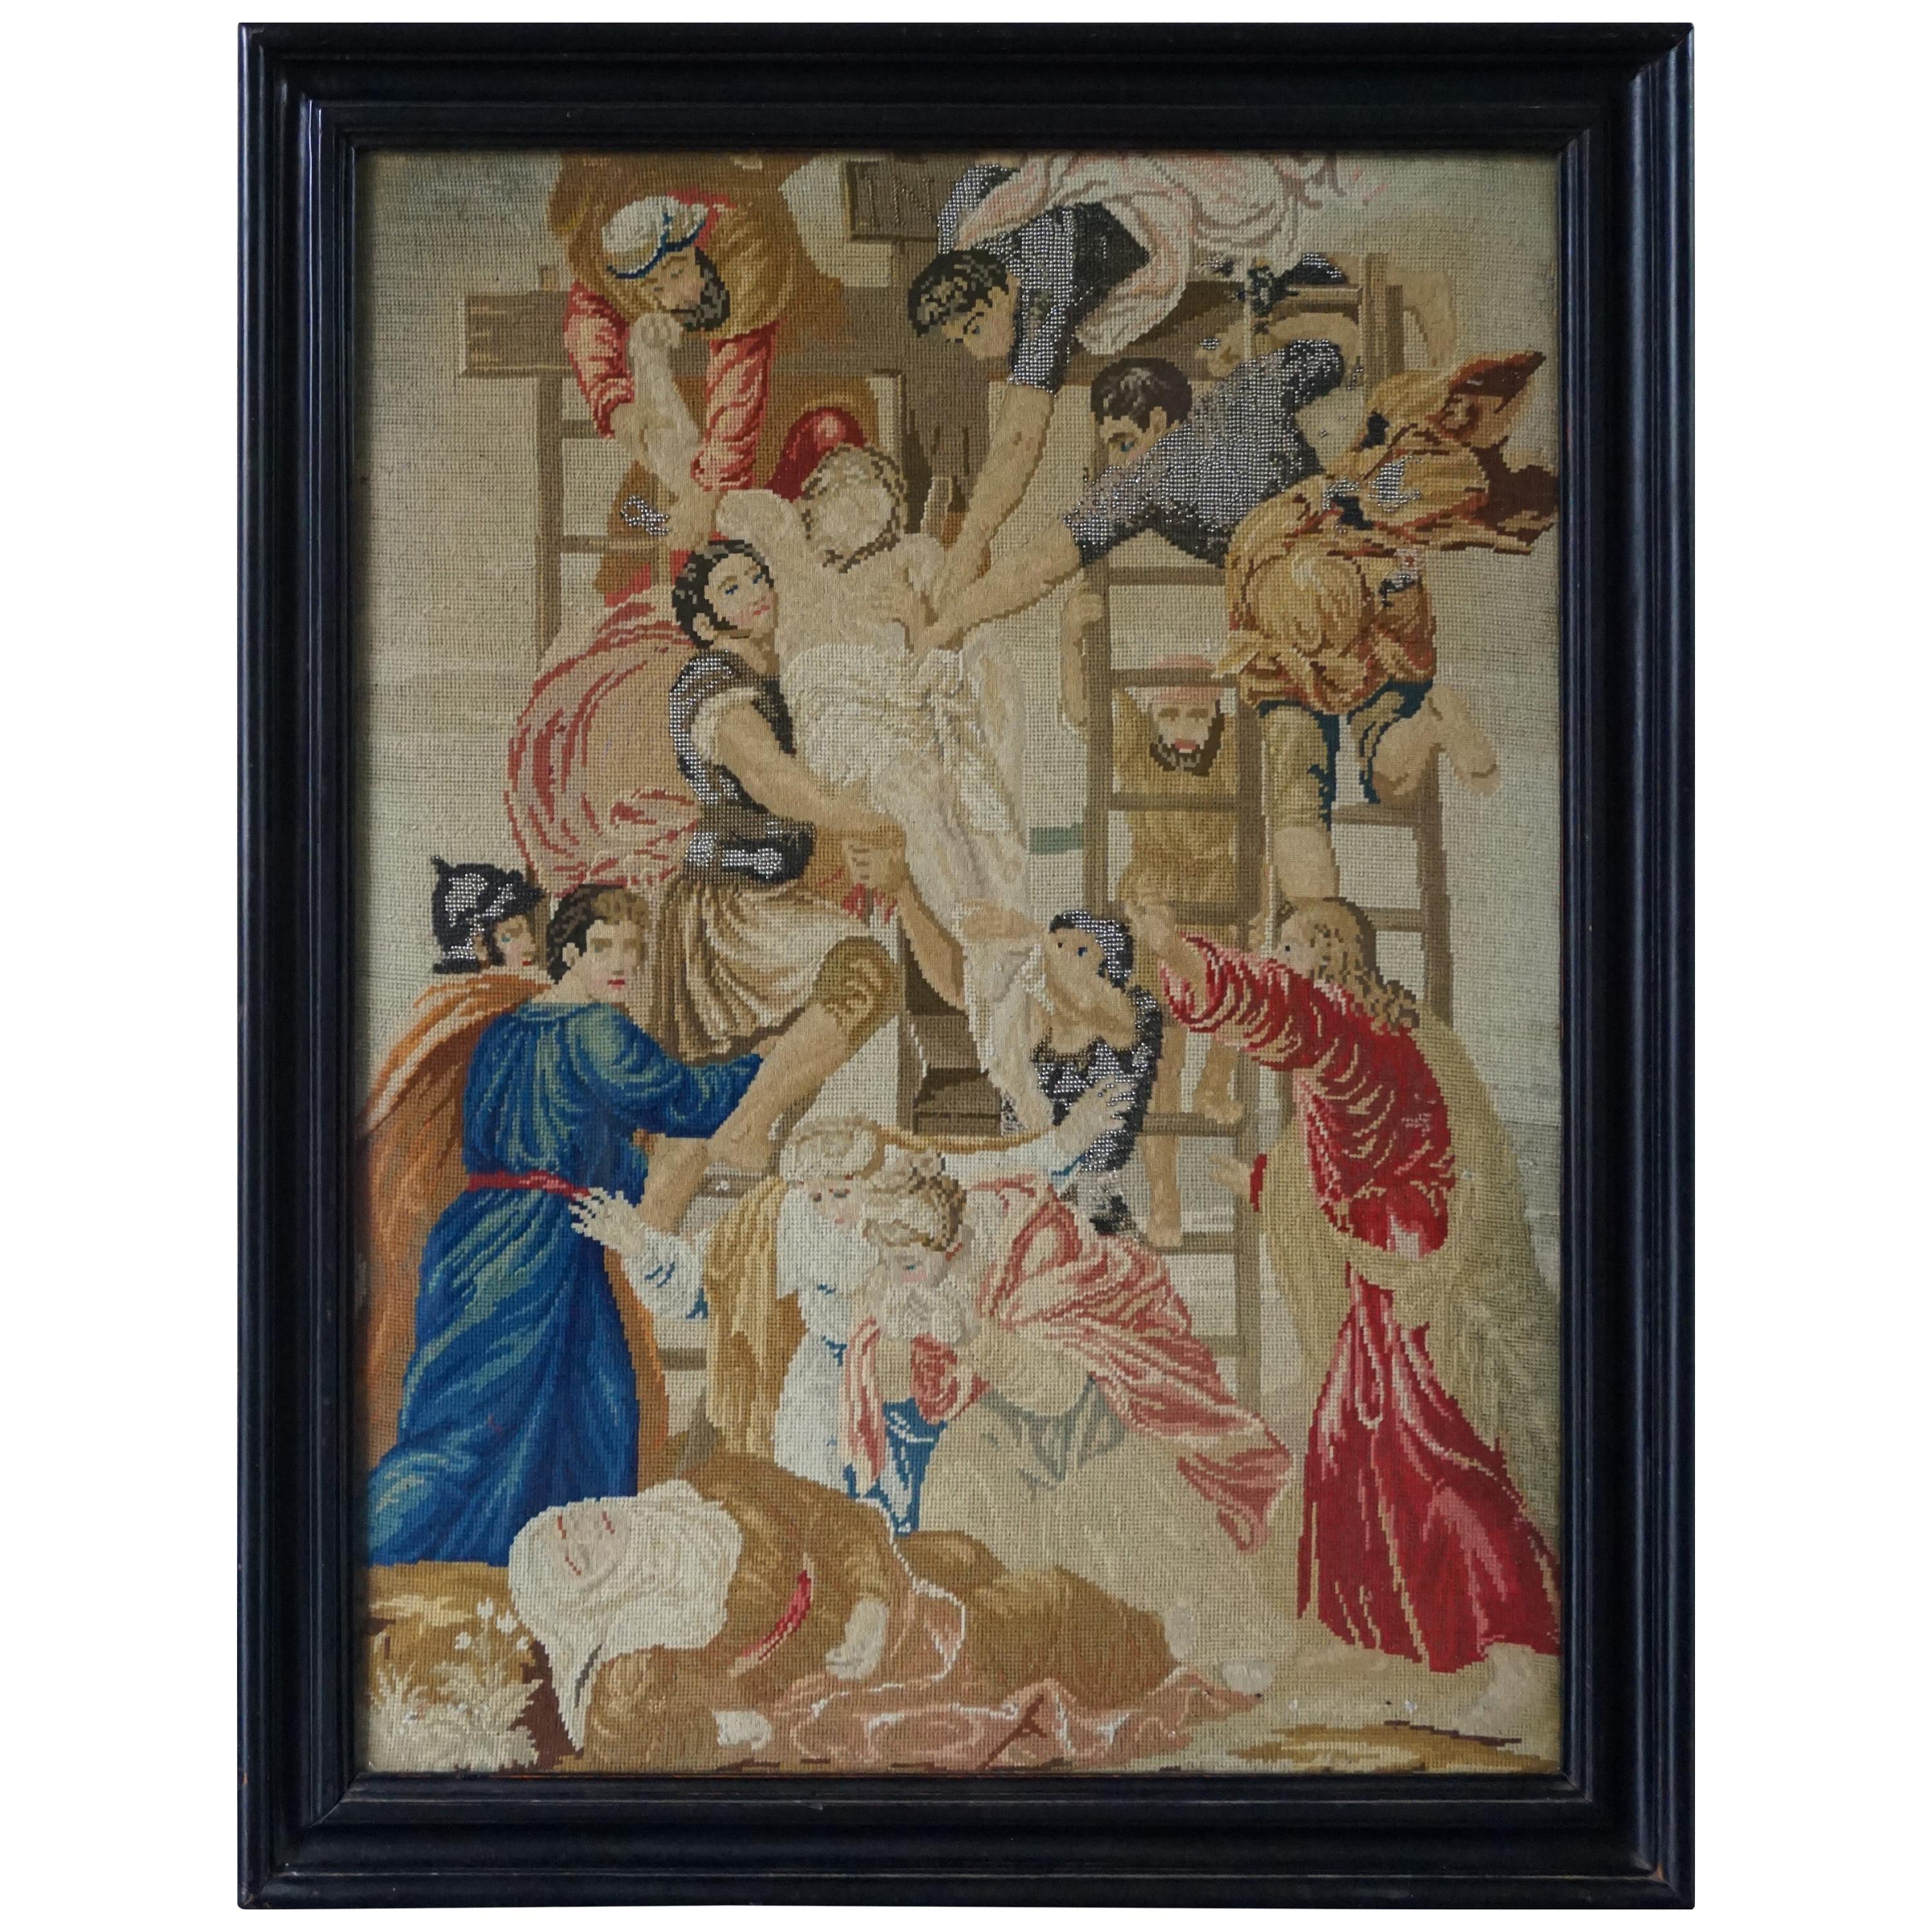 Stunning Mid-1800s Handcrafted Embroidery of Jesus' Descent from the Cross